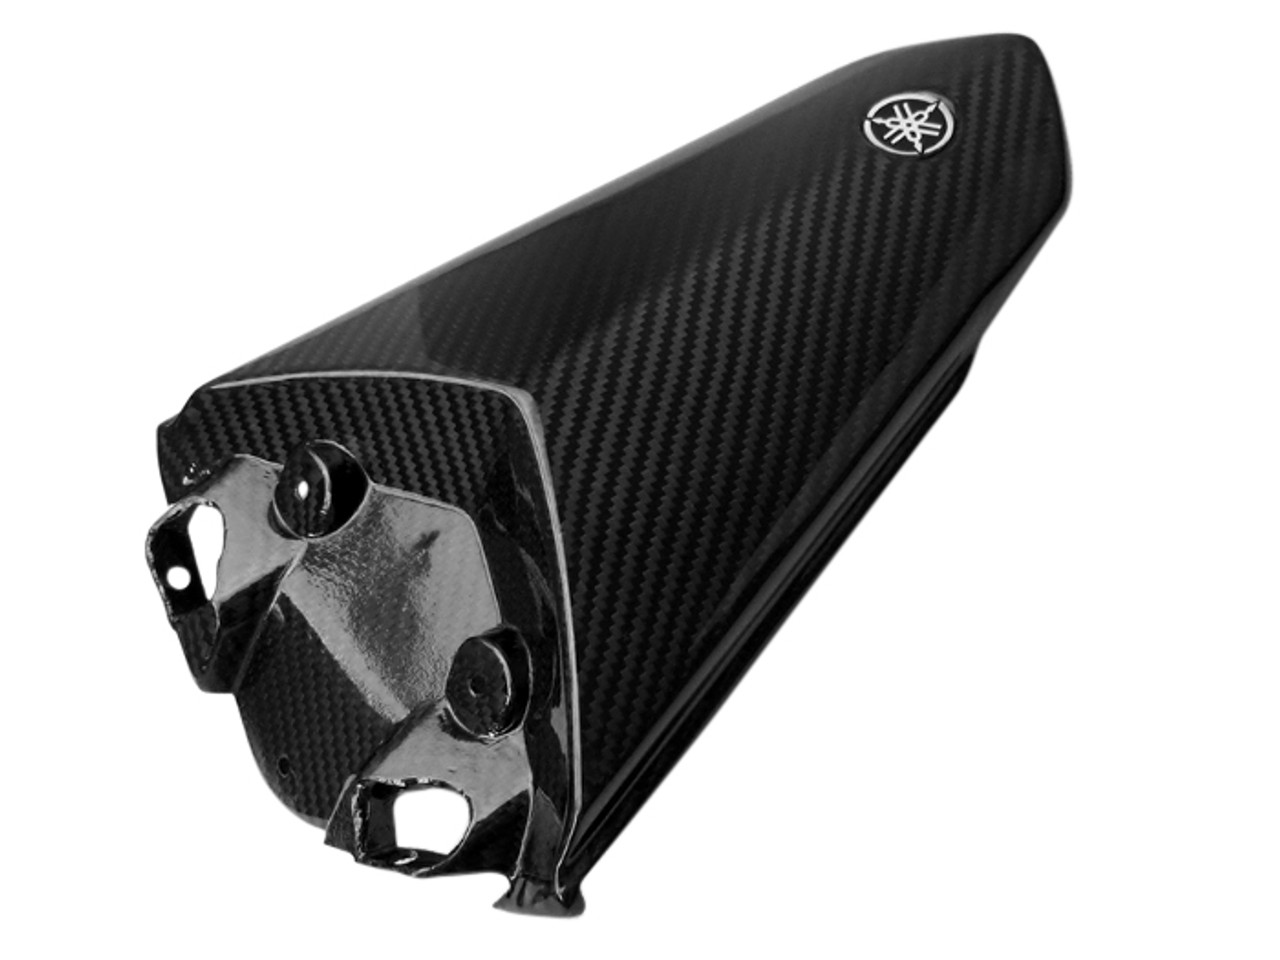 Seat Cowl in Glossy Twill Weave Carbon Fiber for Yamaha R1 2015+ (logo not included)